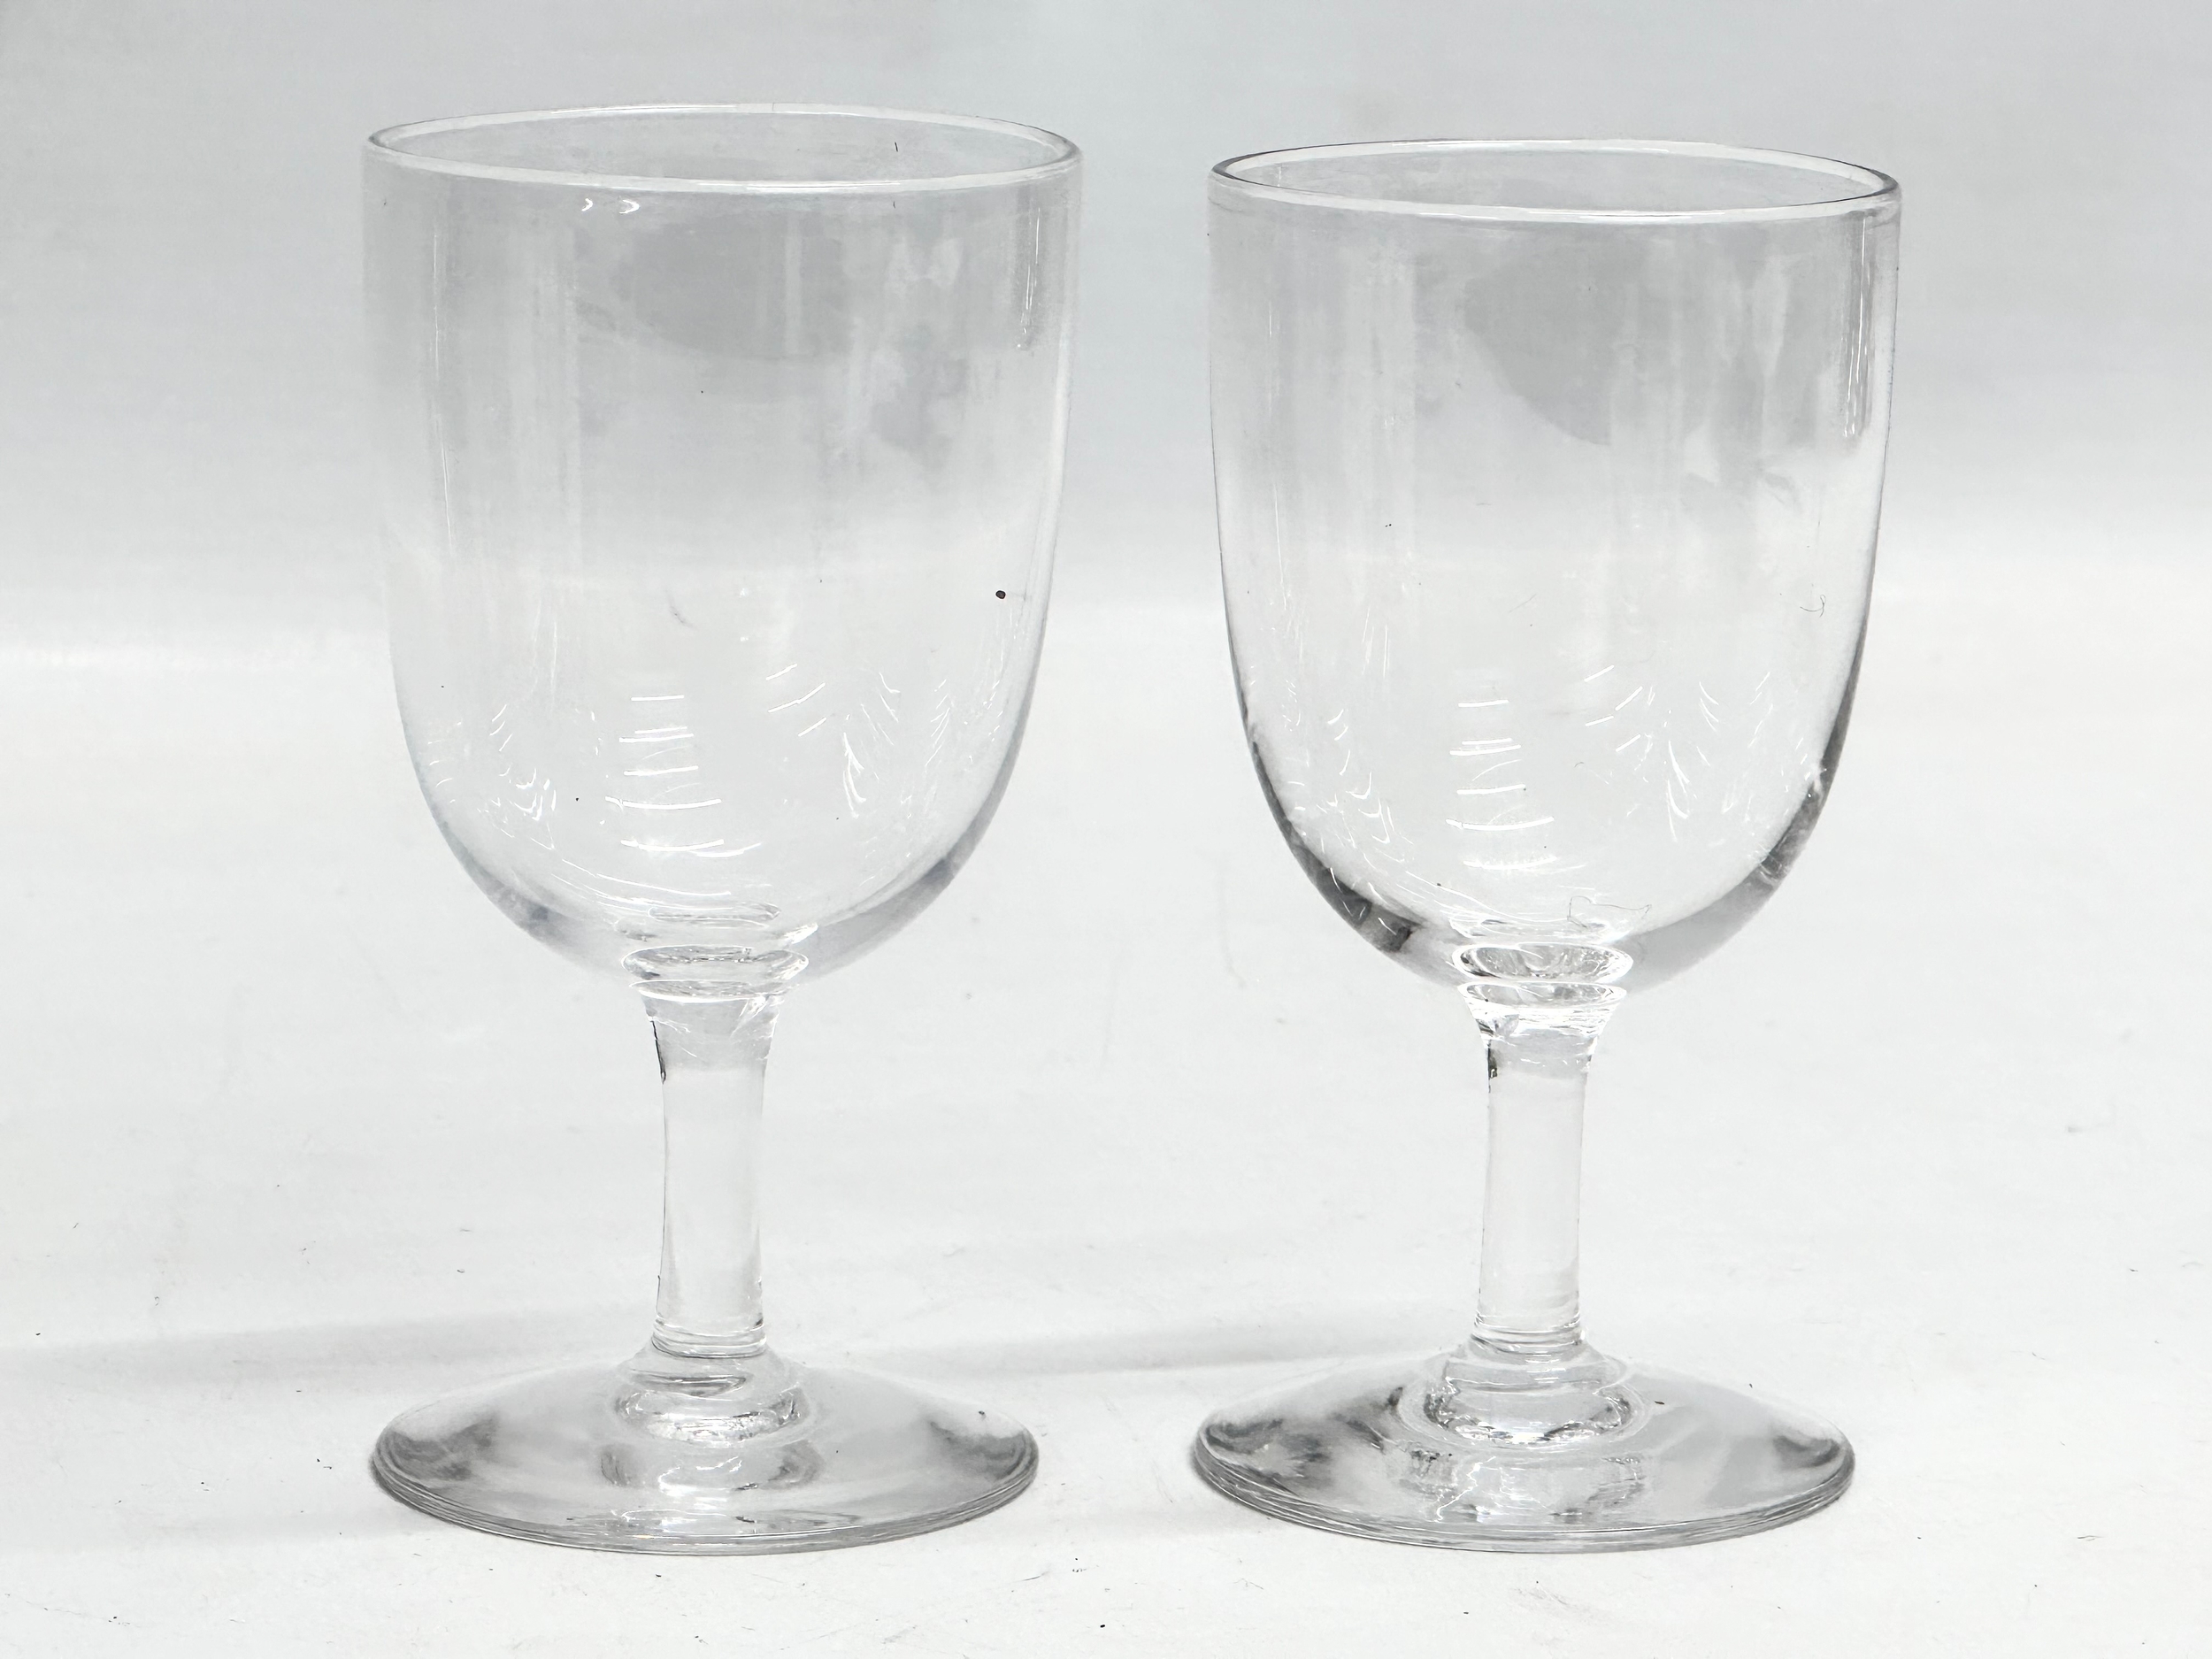 A collection of Late 19th and Early 20th Century liquor and cocktail glasses. - Image 4 of 5